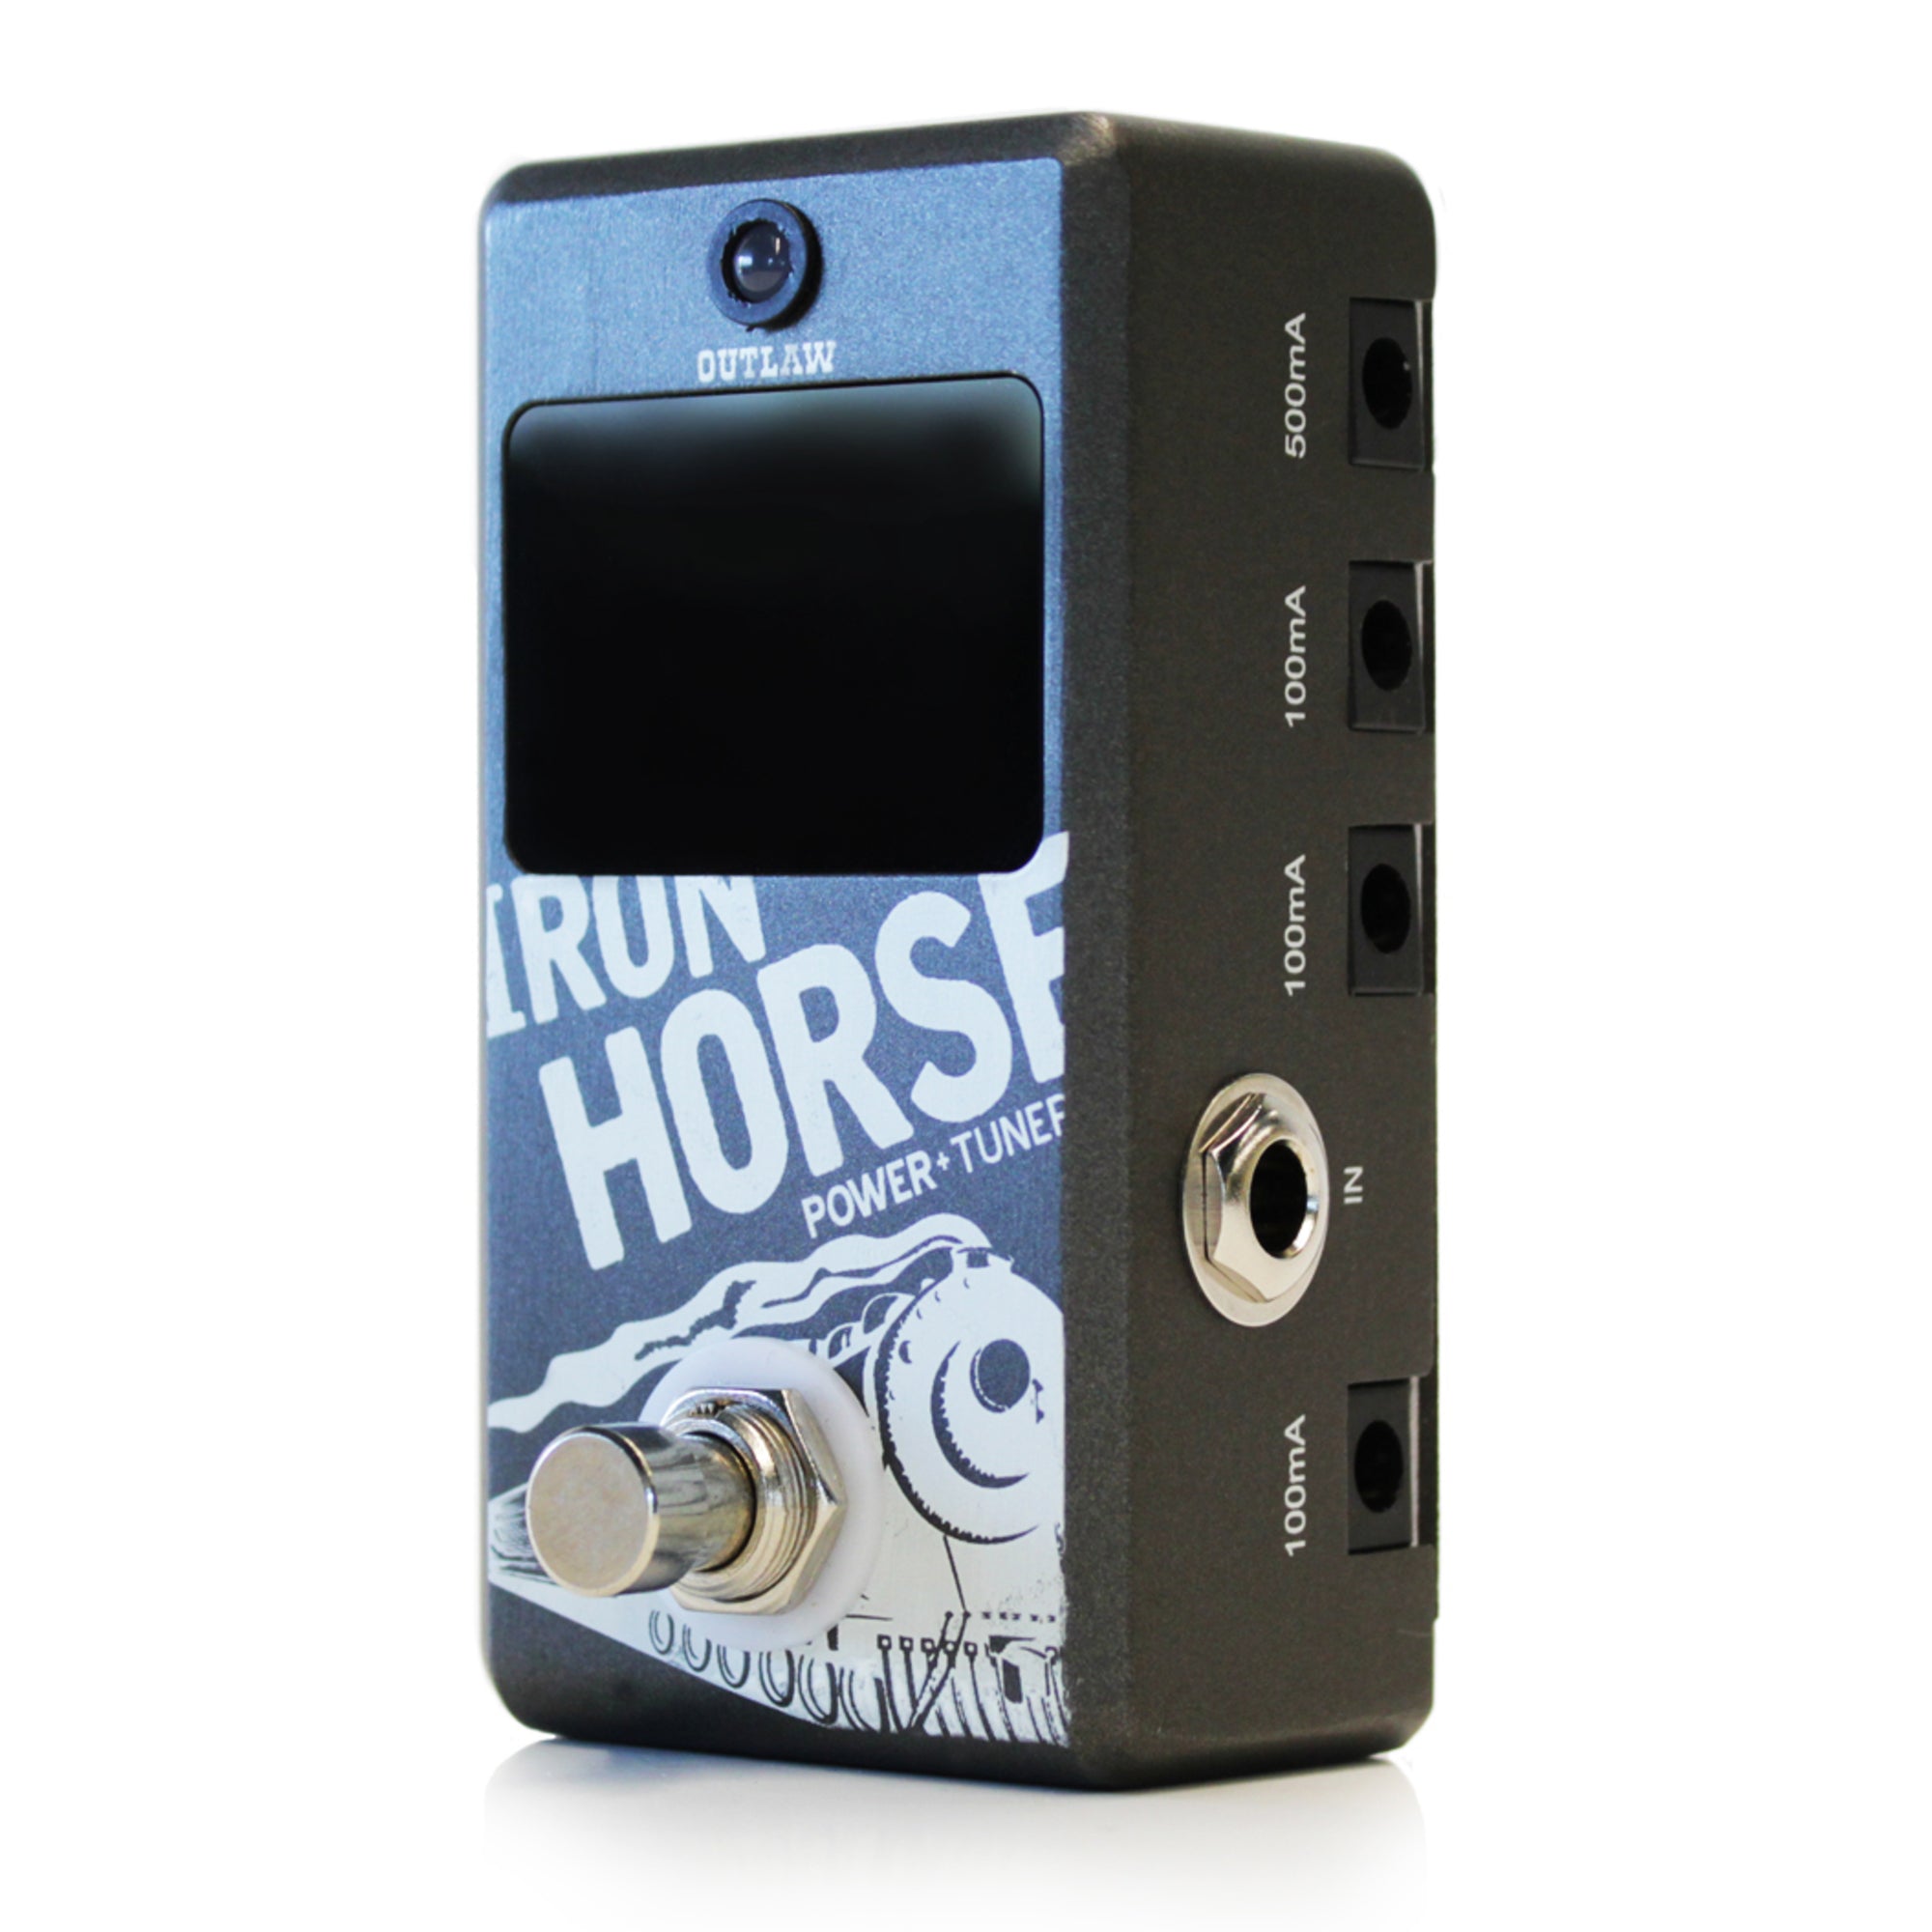 Outlaw Iron-Horse Power Supply & Tuner Pedal